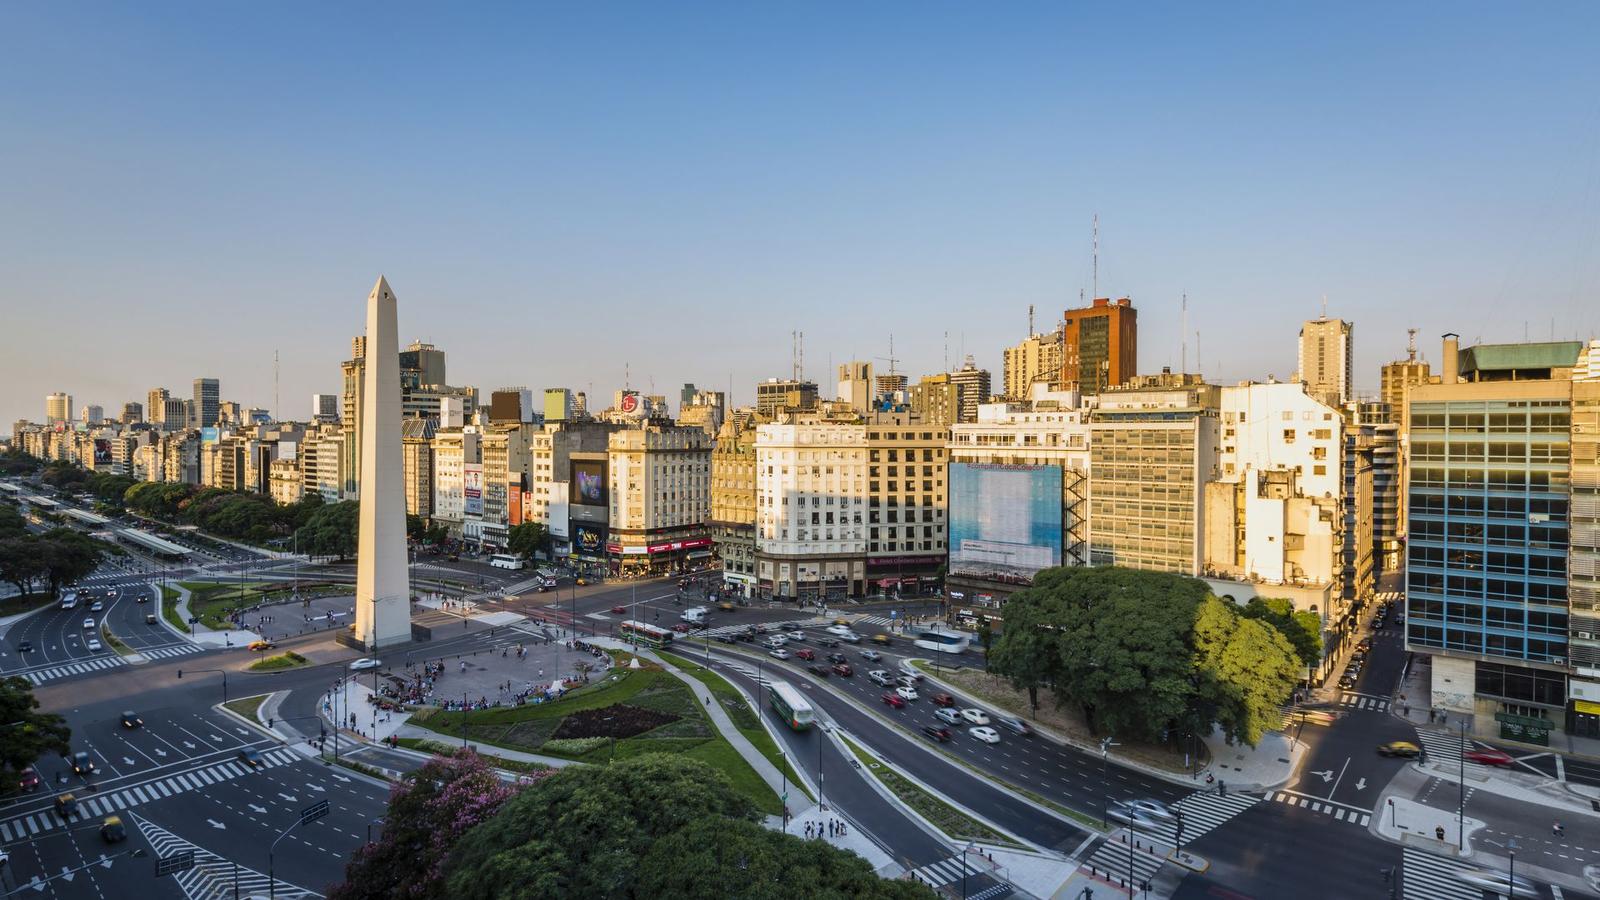 Name That City! Put Your Travel Knowledge to Test With This Picture Quiz! Buenos Aires, Argentina